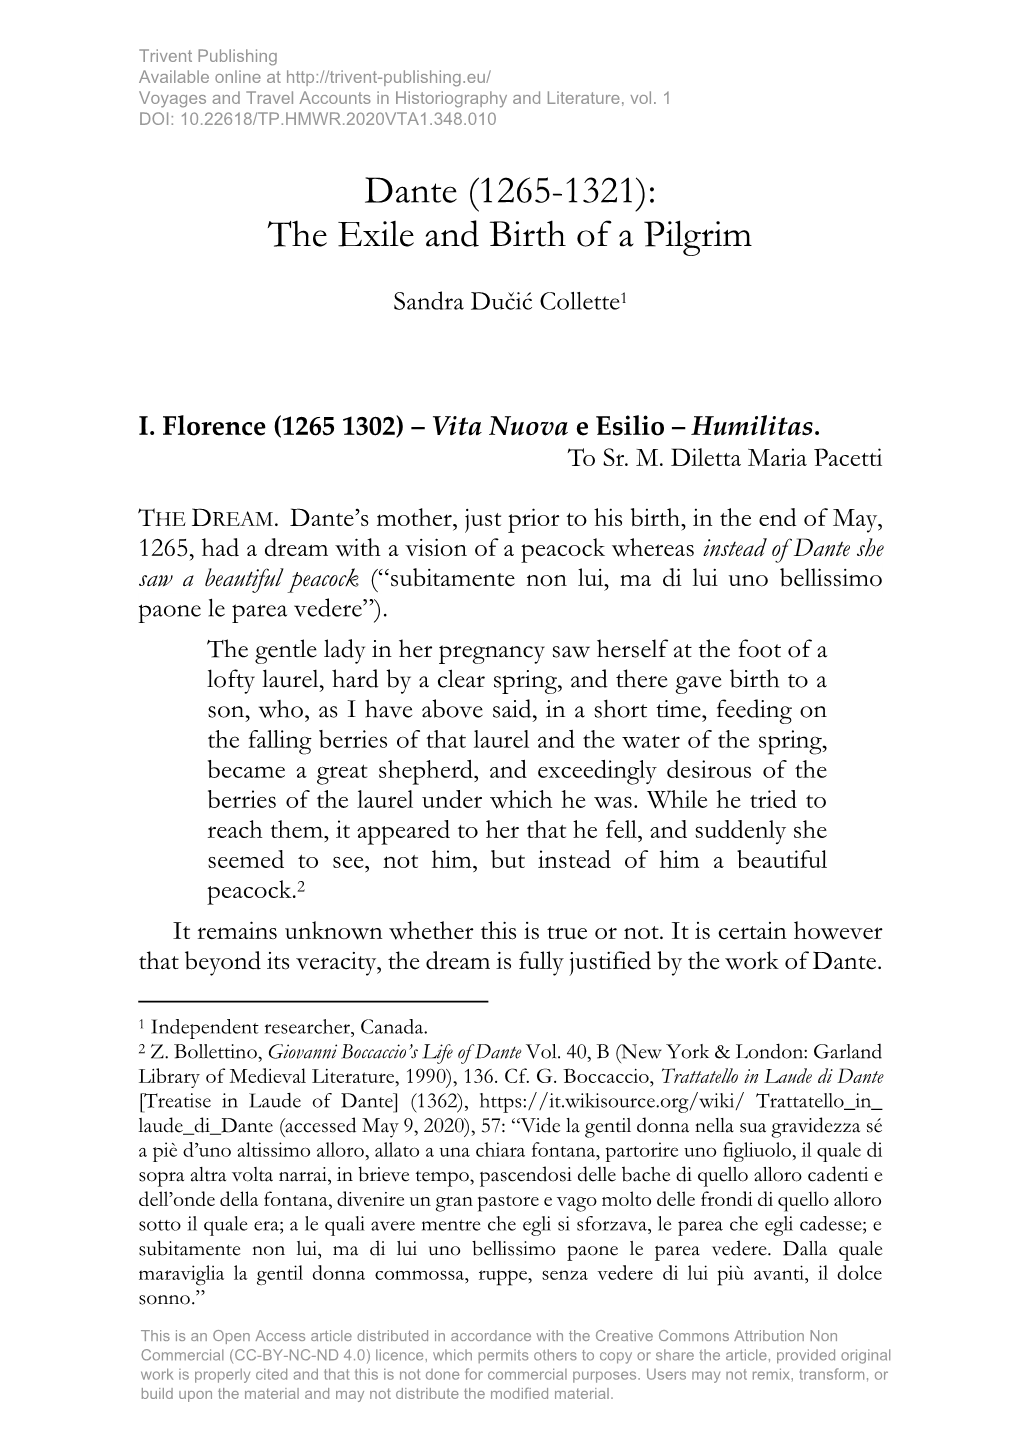 Dante (1265-1321): the Exile and Birth of a Pilgrim